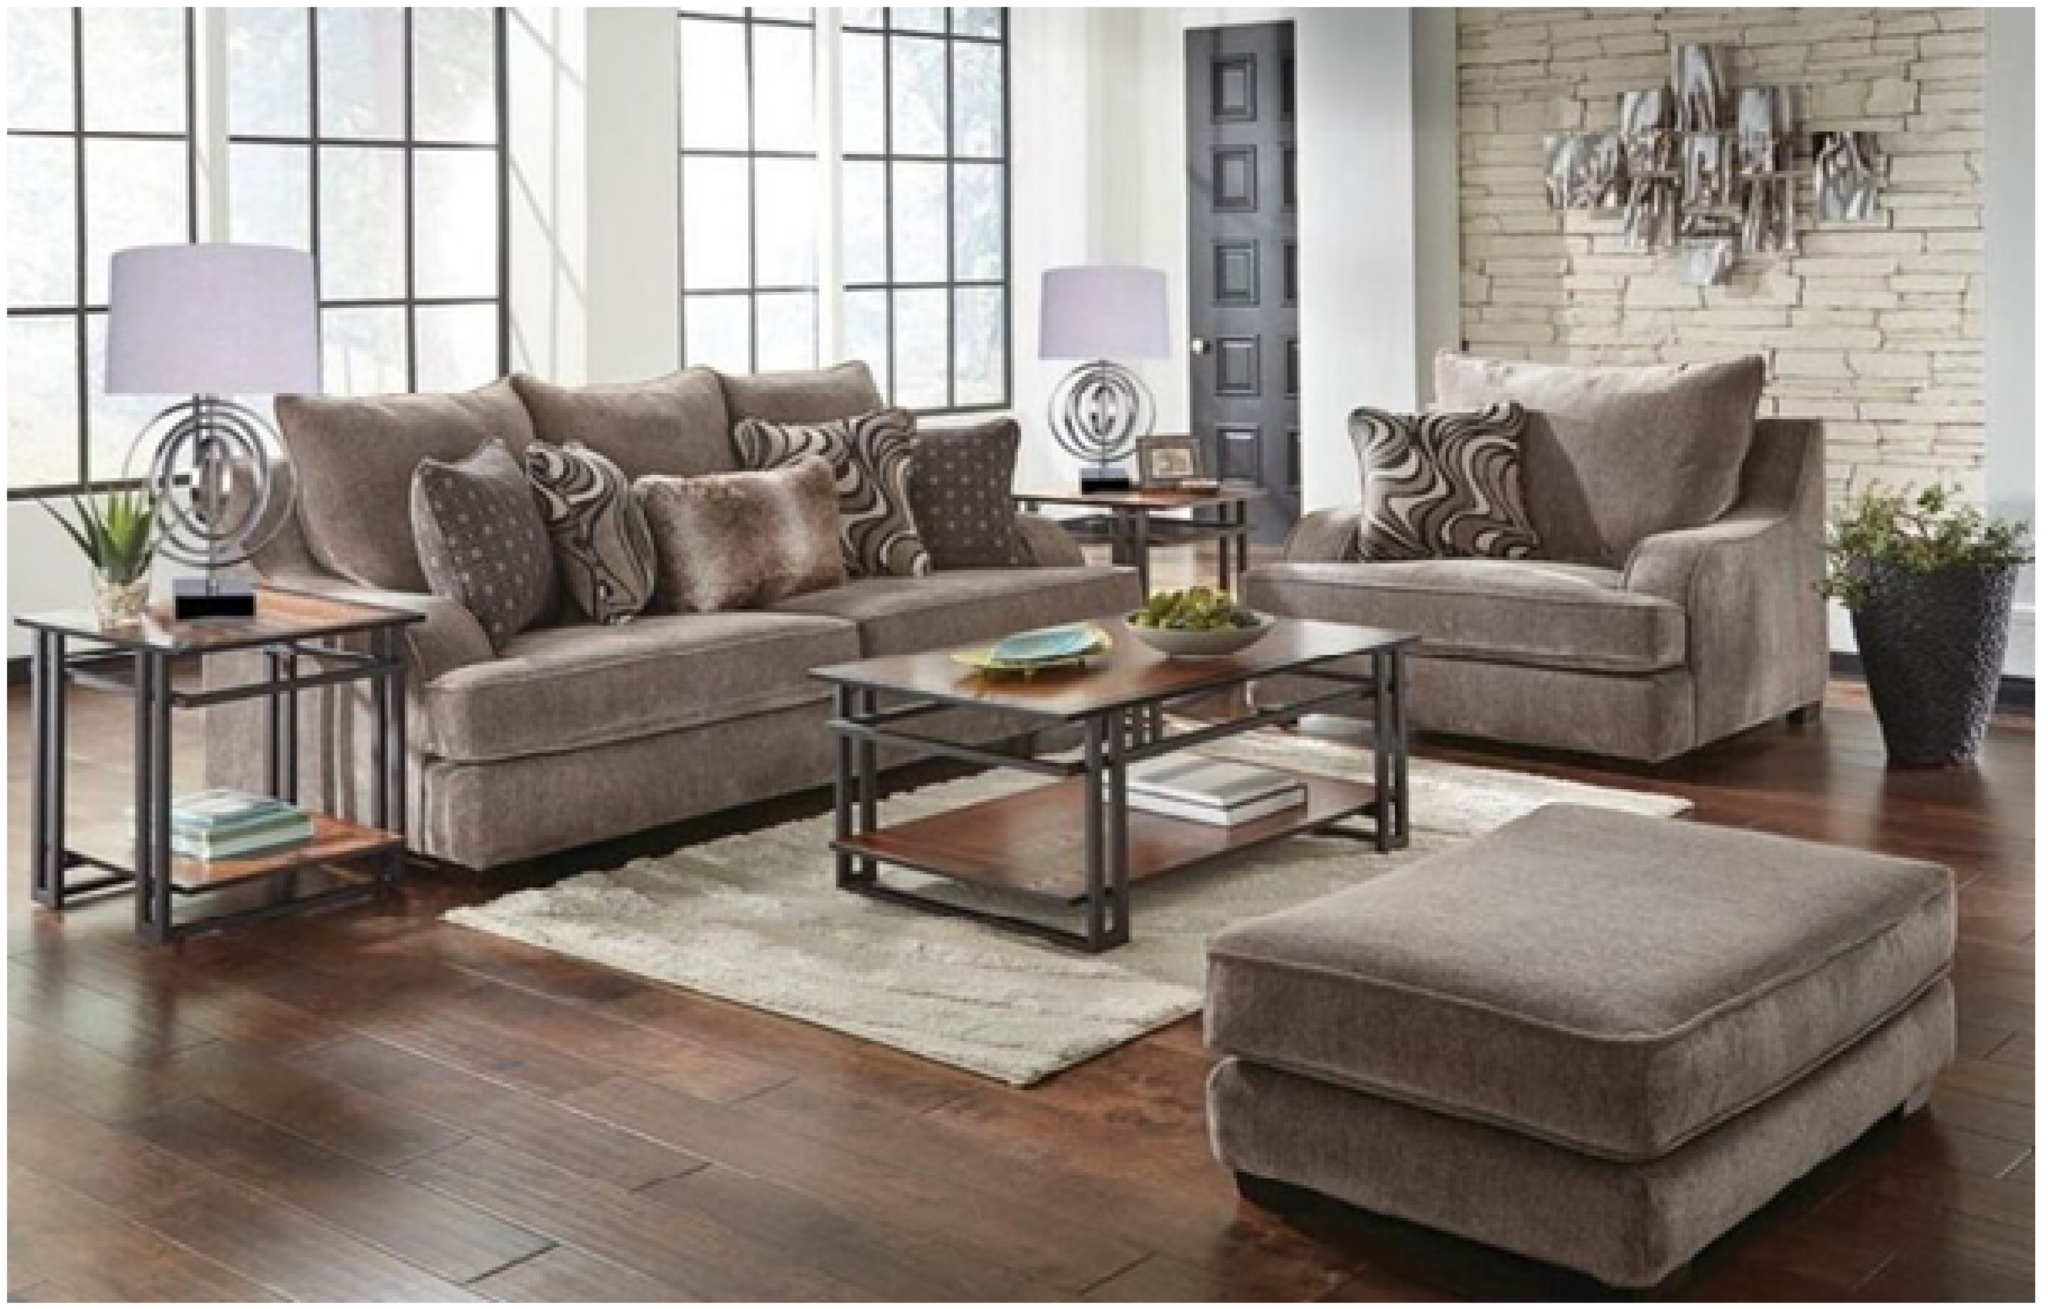 How to Find the Right Furniture Stores as Per Your Needs in Toronto:-